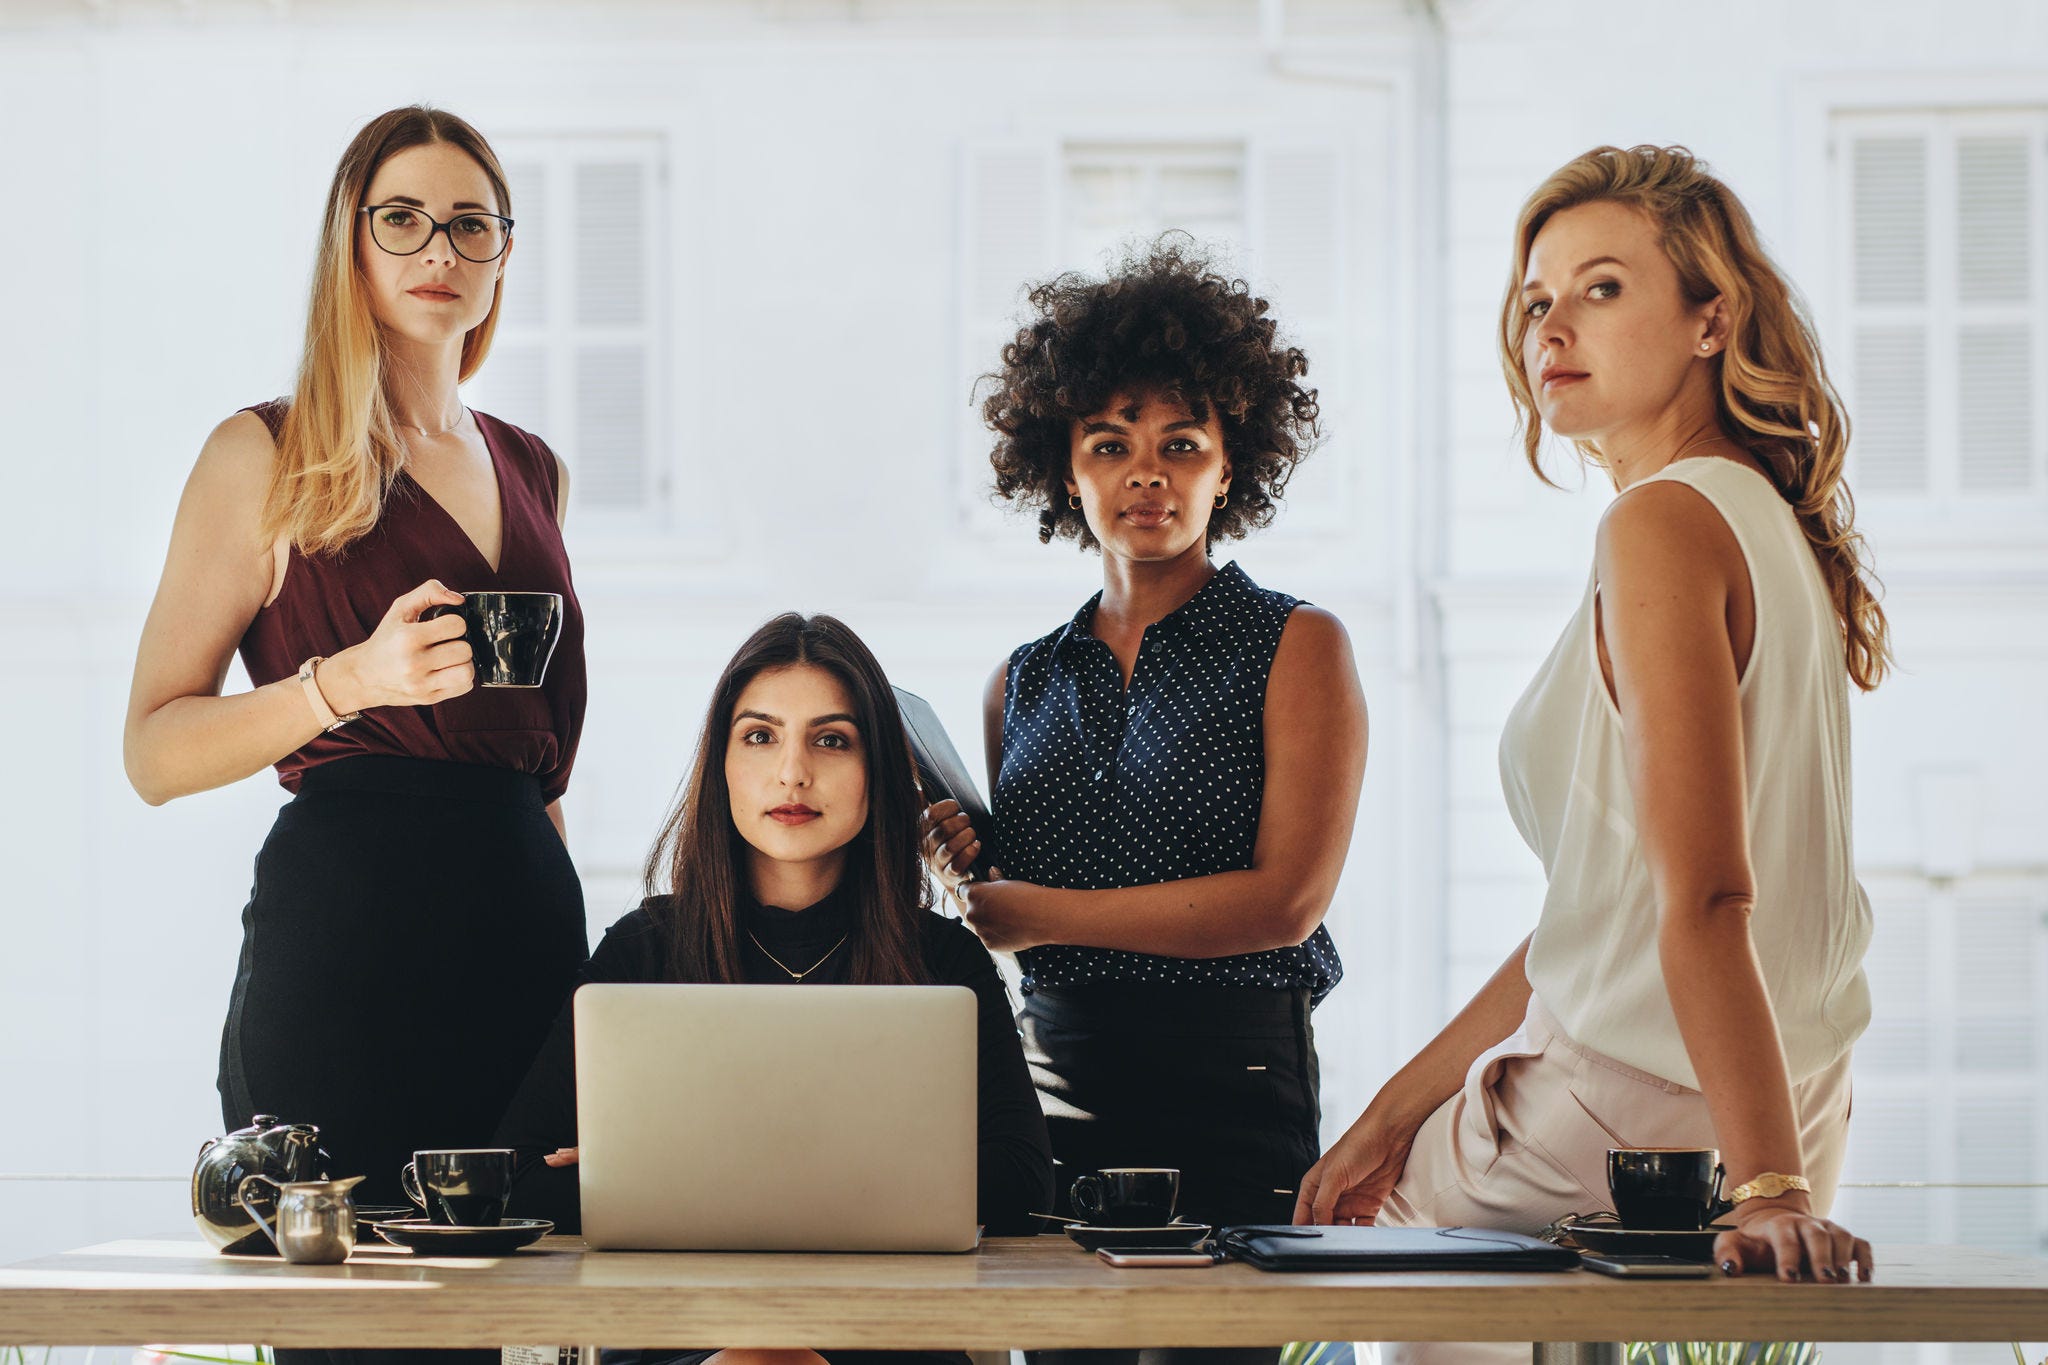 Group of businesswomen in casuals together at office desk and looking at camera